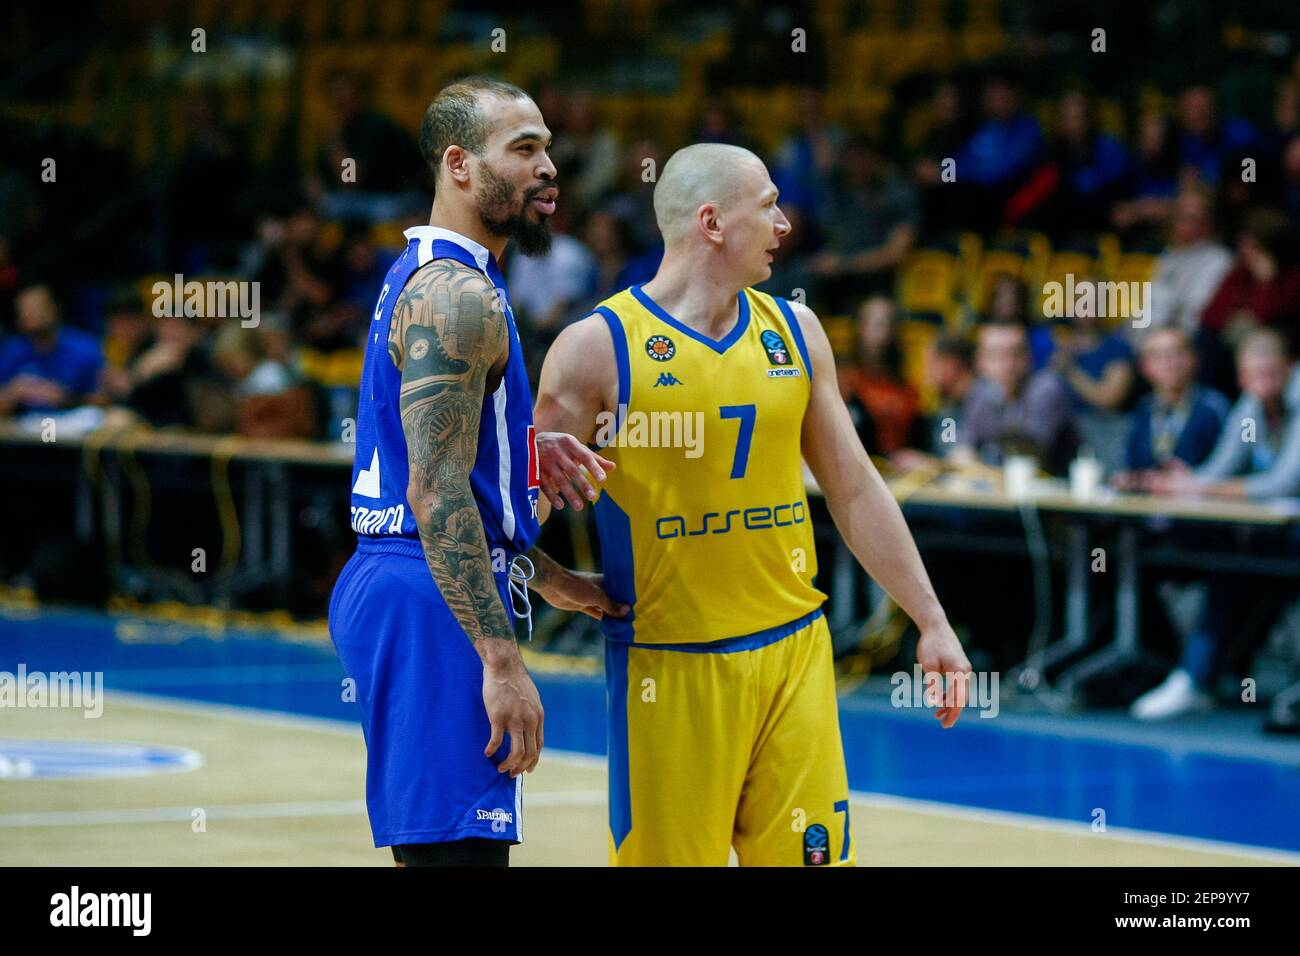 Justin Cobbs and Krzysztof Szubarga are seen in action during the 7days EuroCup  group D match between Asseco Arka Gdynia and Buducnost Voli Podgorica in  Gdynia. (Final Score; Asseco Arka Gdynia 61:78